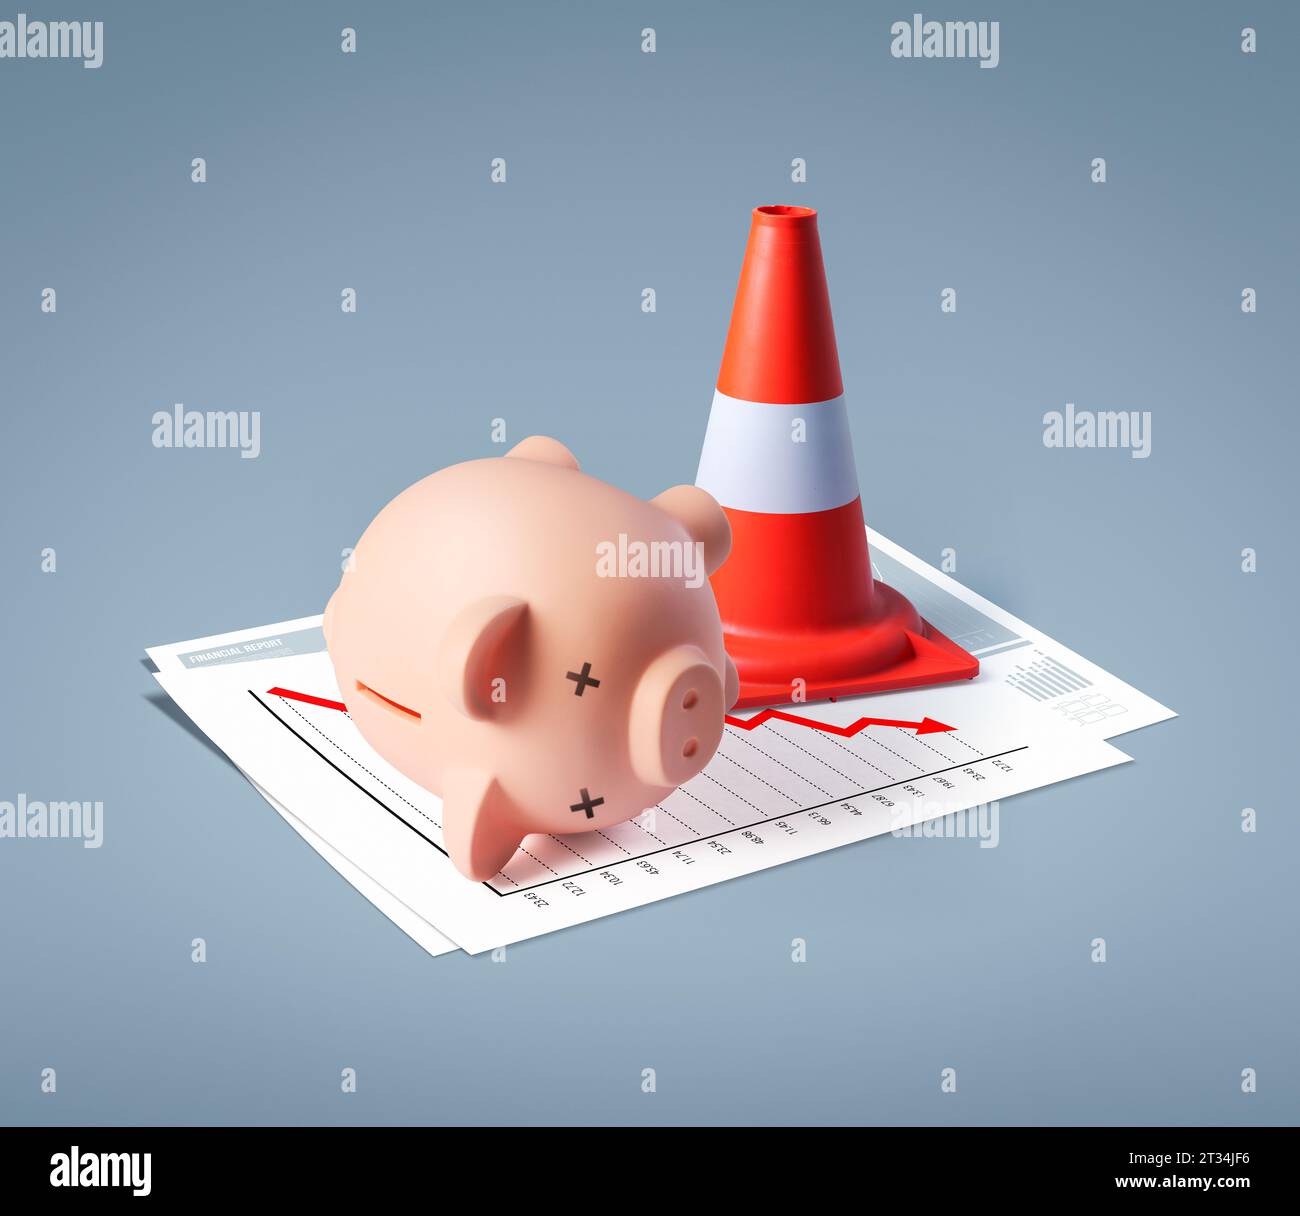 High-risk investment and financial crisis: dead piggy bank on financial chart with negative trend and traffic cone Stock Photo